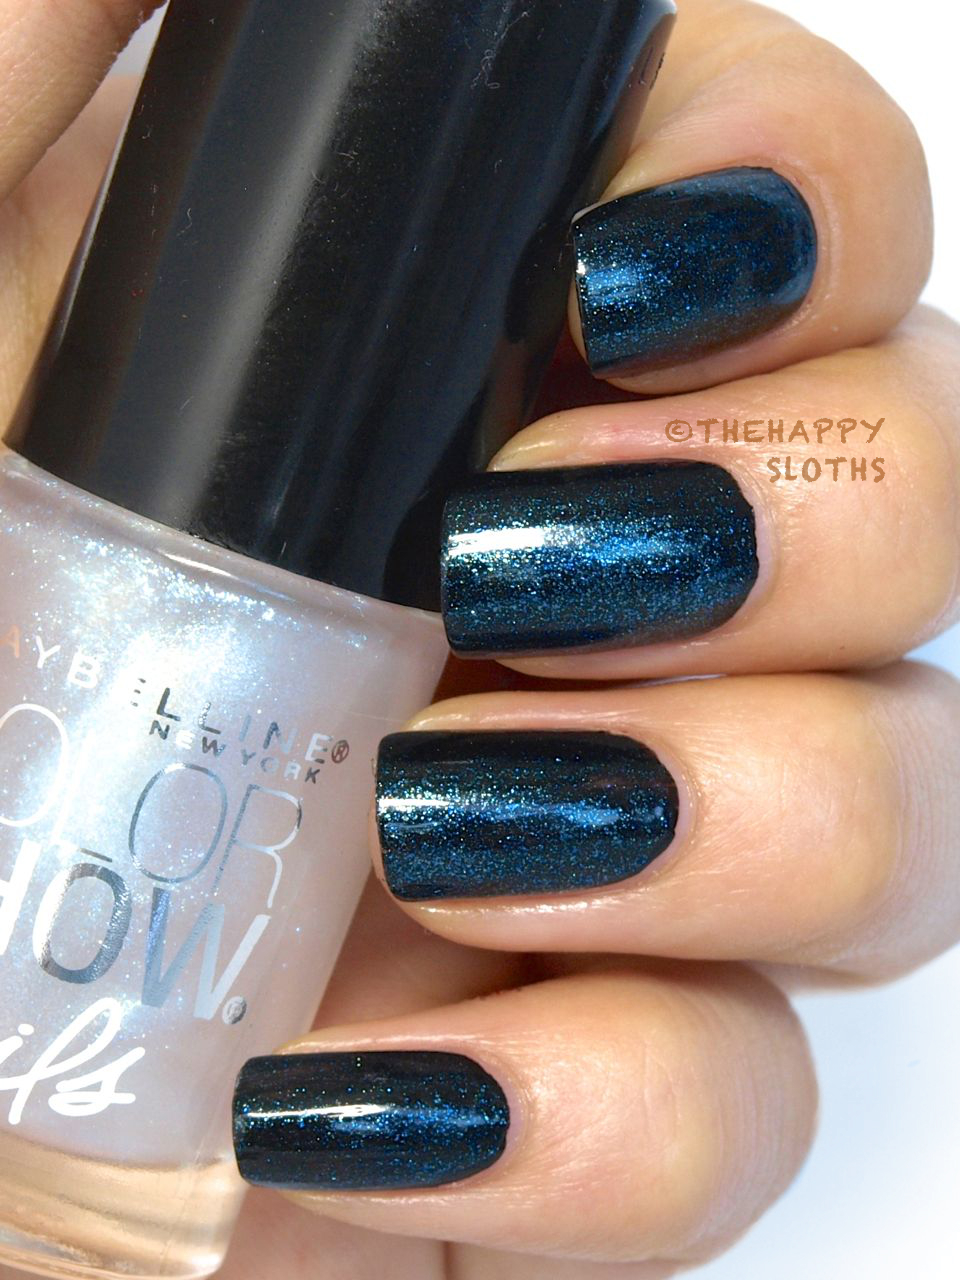 Color Show Veils Nail Polish in "Crystal Disguise": Review and Swatches